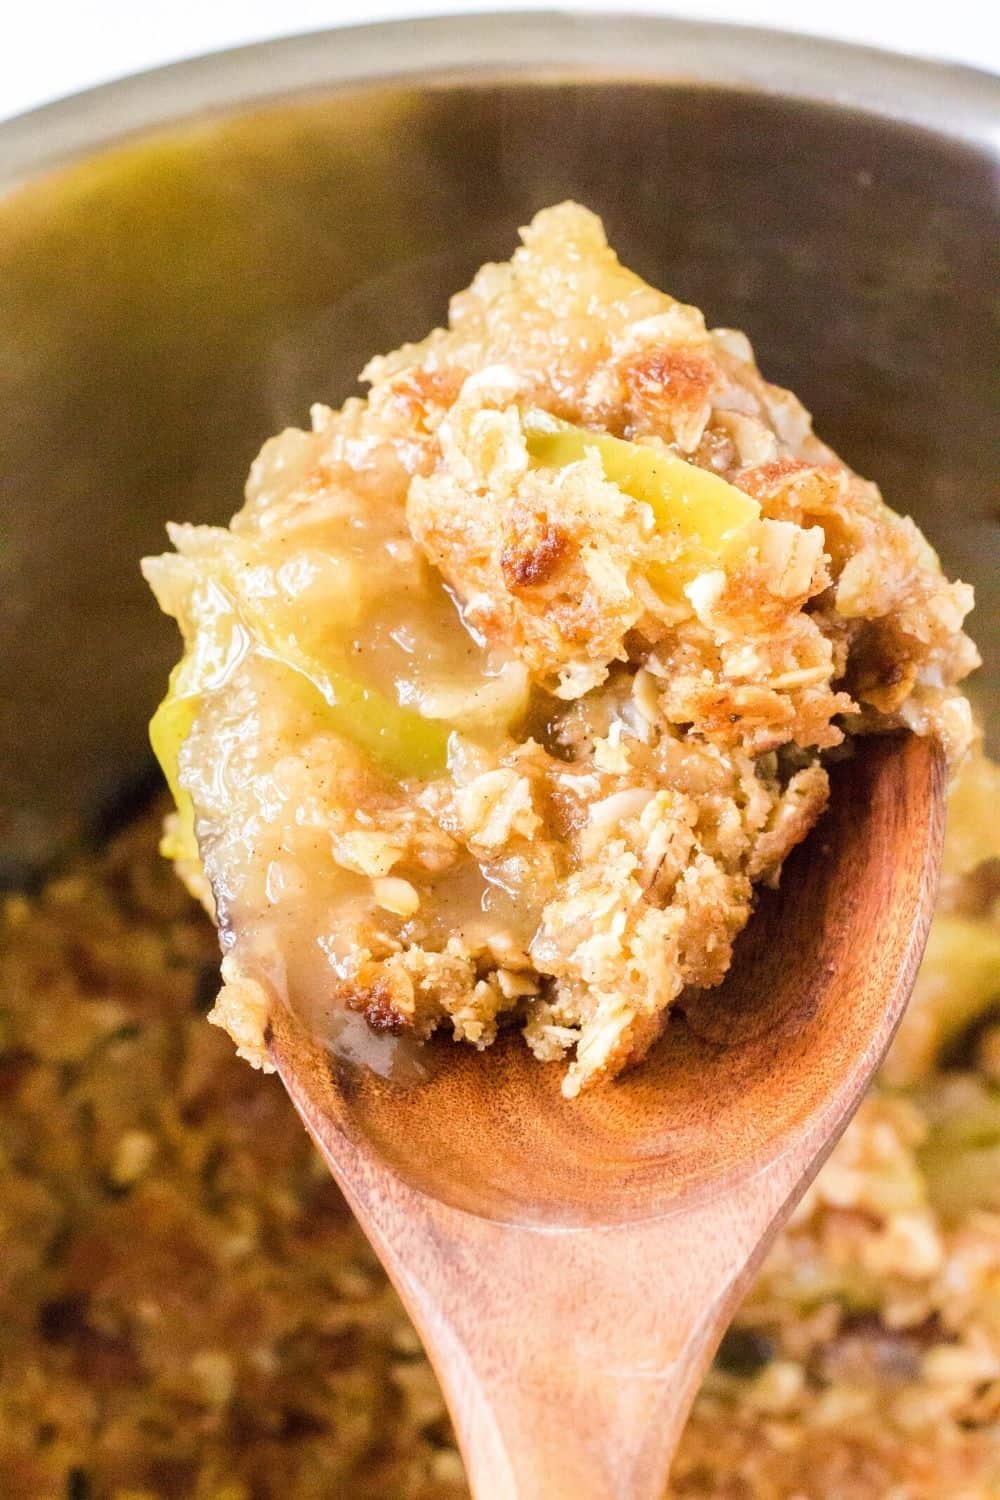 Wooden spoon scooping out some apple crisp cooked in the Instant Pot